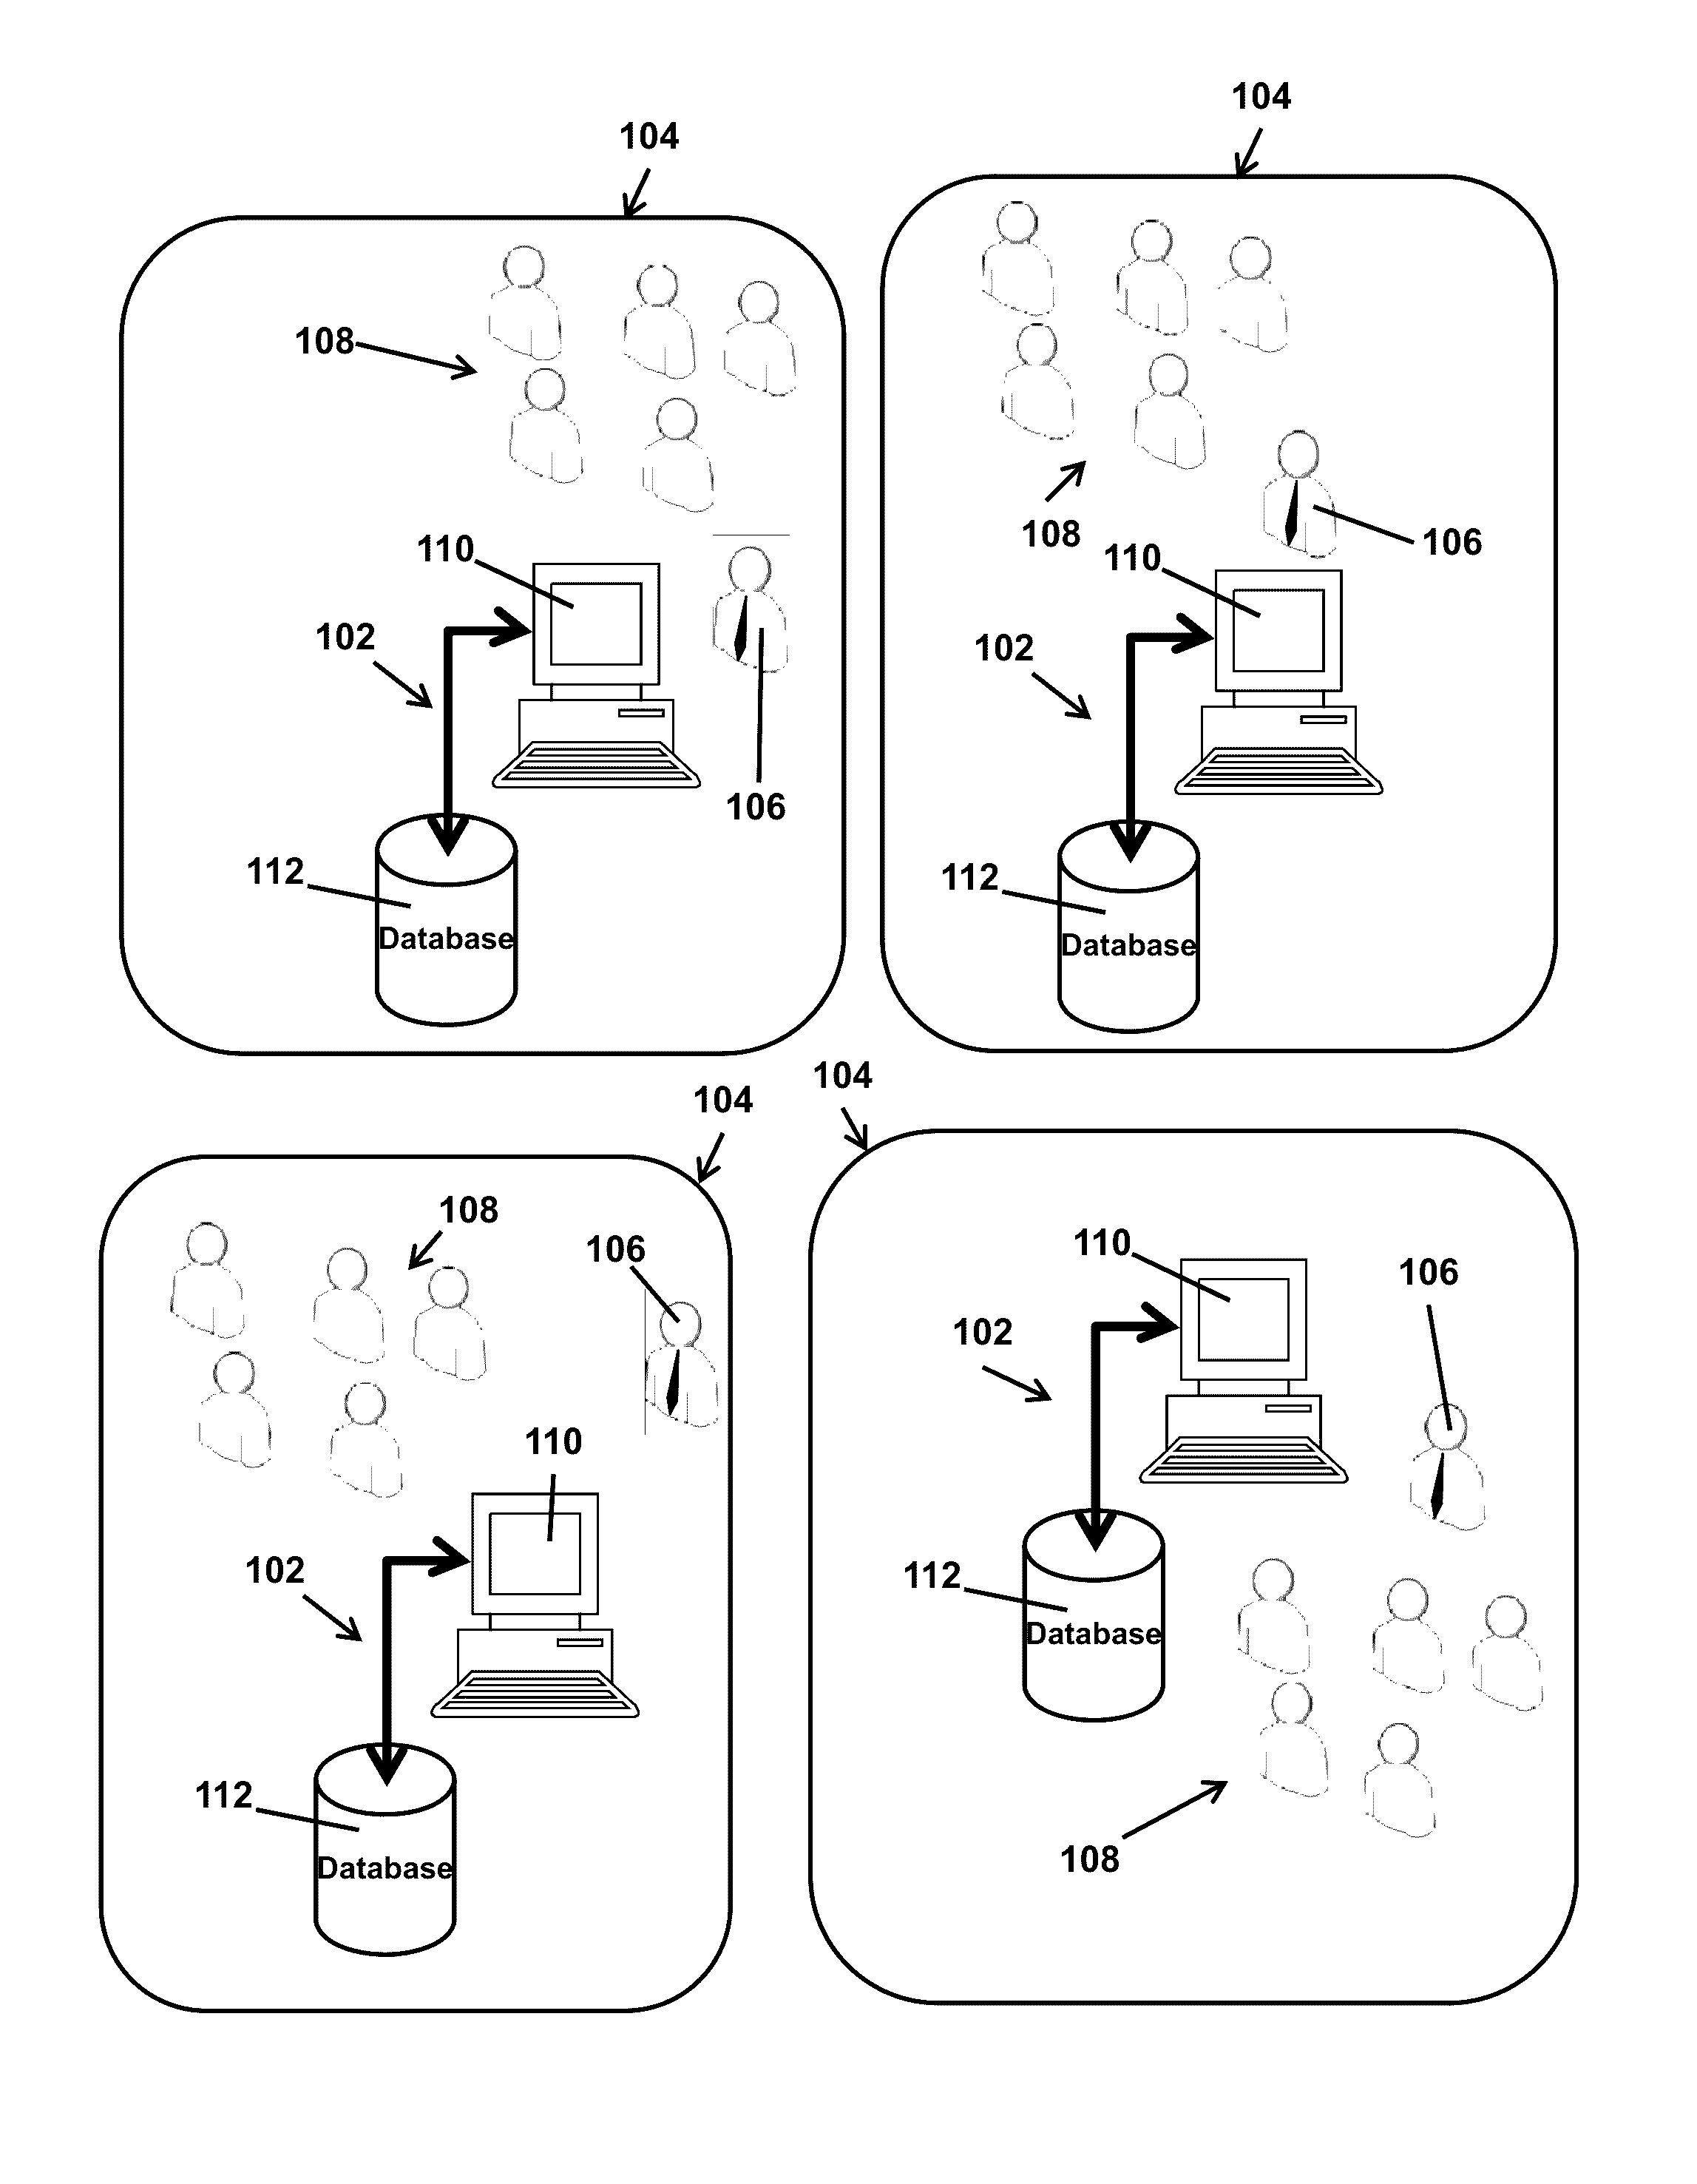 System and method for analyzing distributed electronic medical record data to determine standards compliance